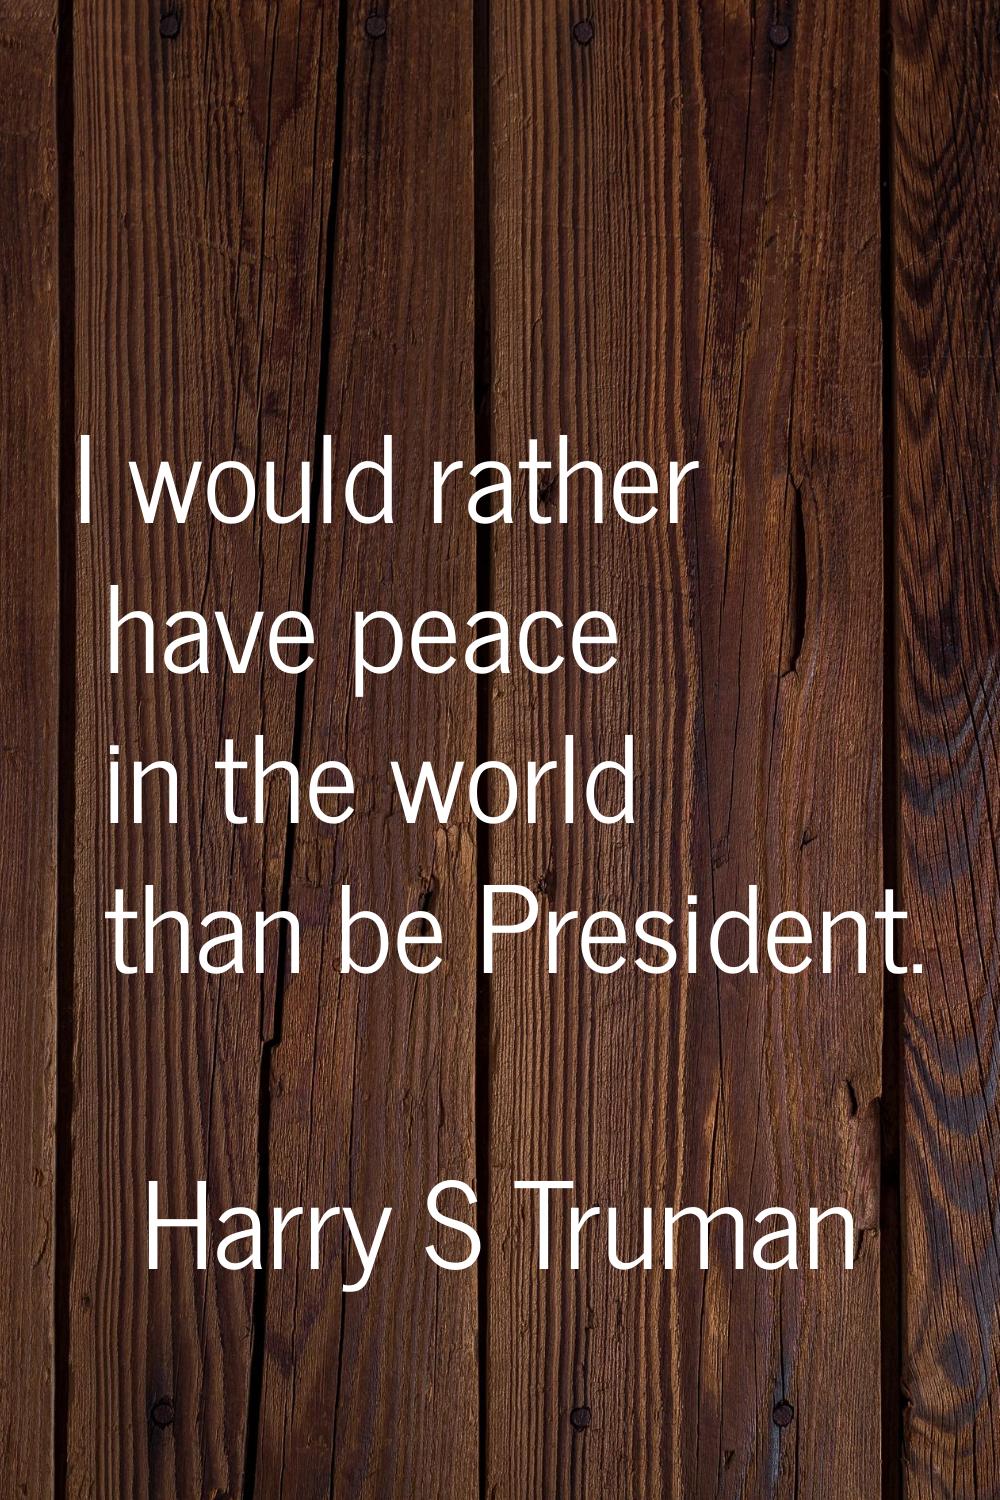 I would rather have peace in the world than be President.